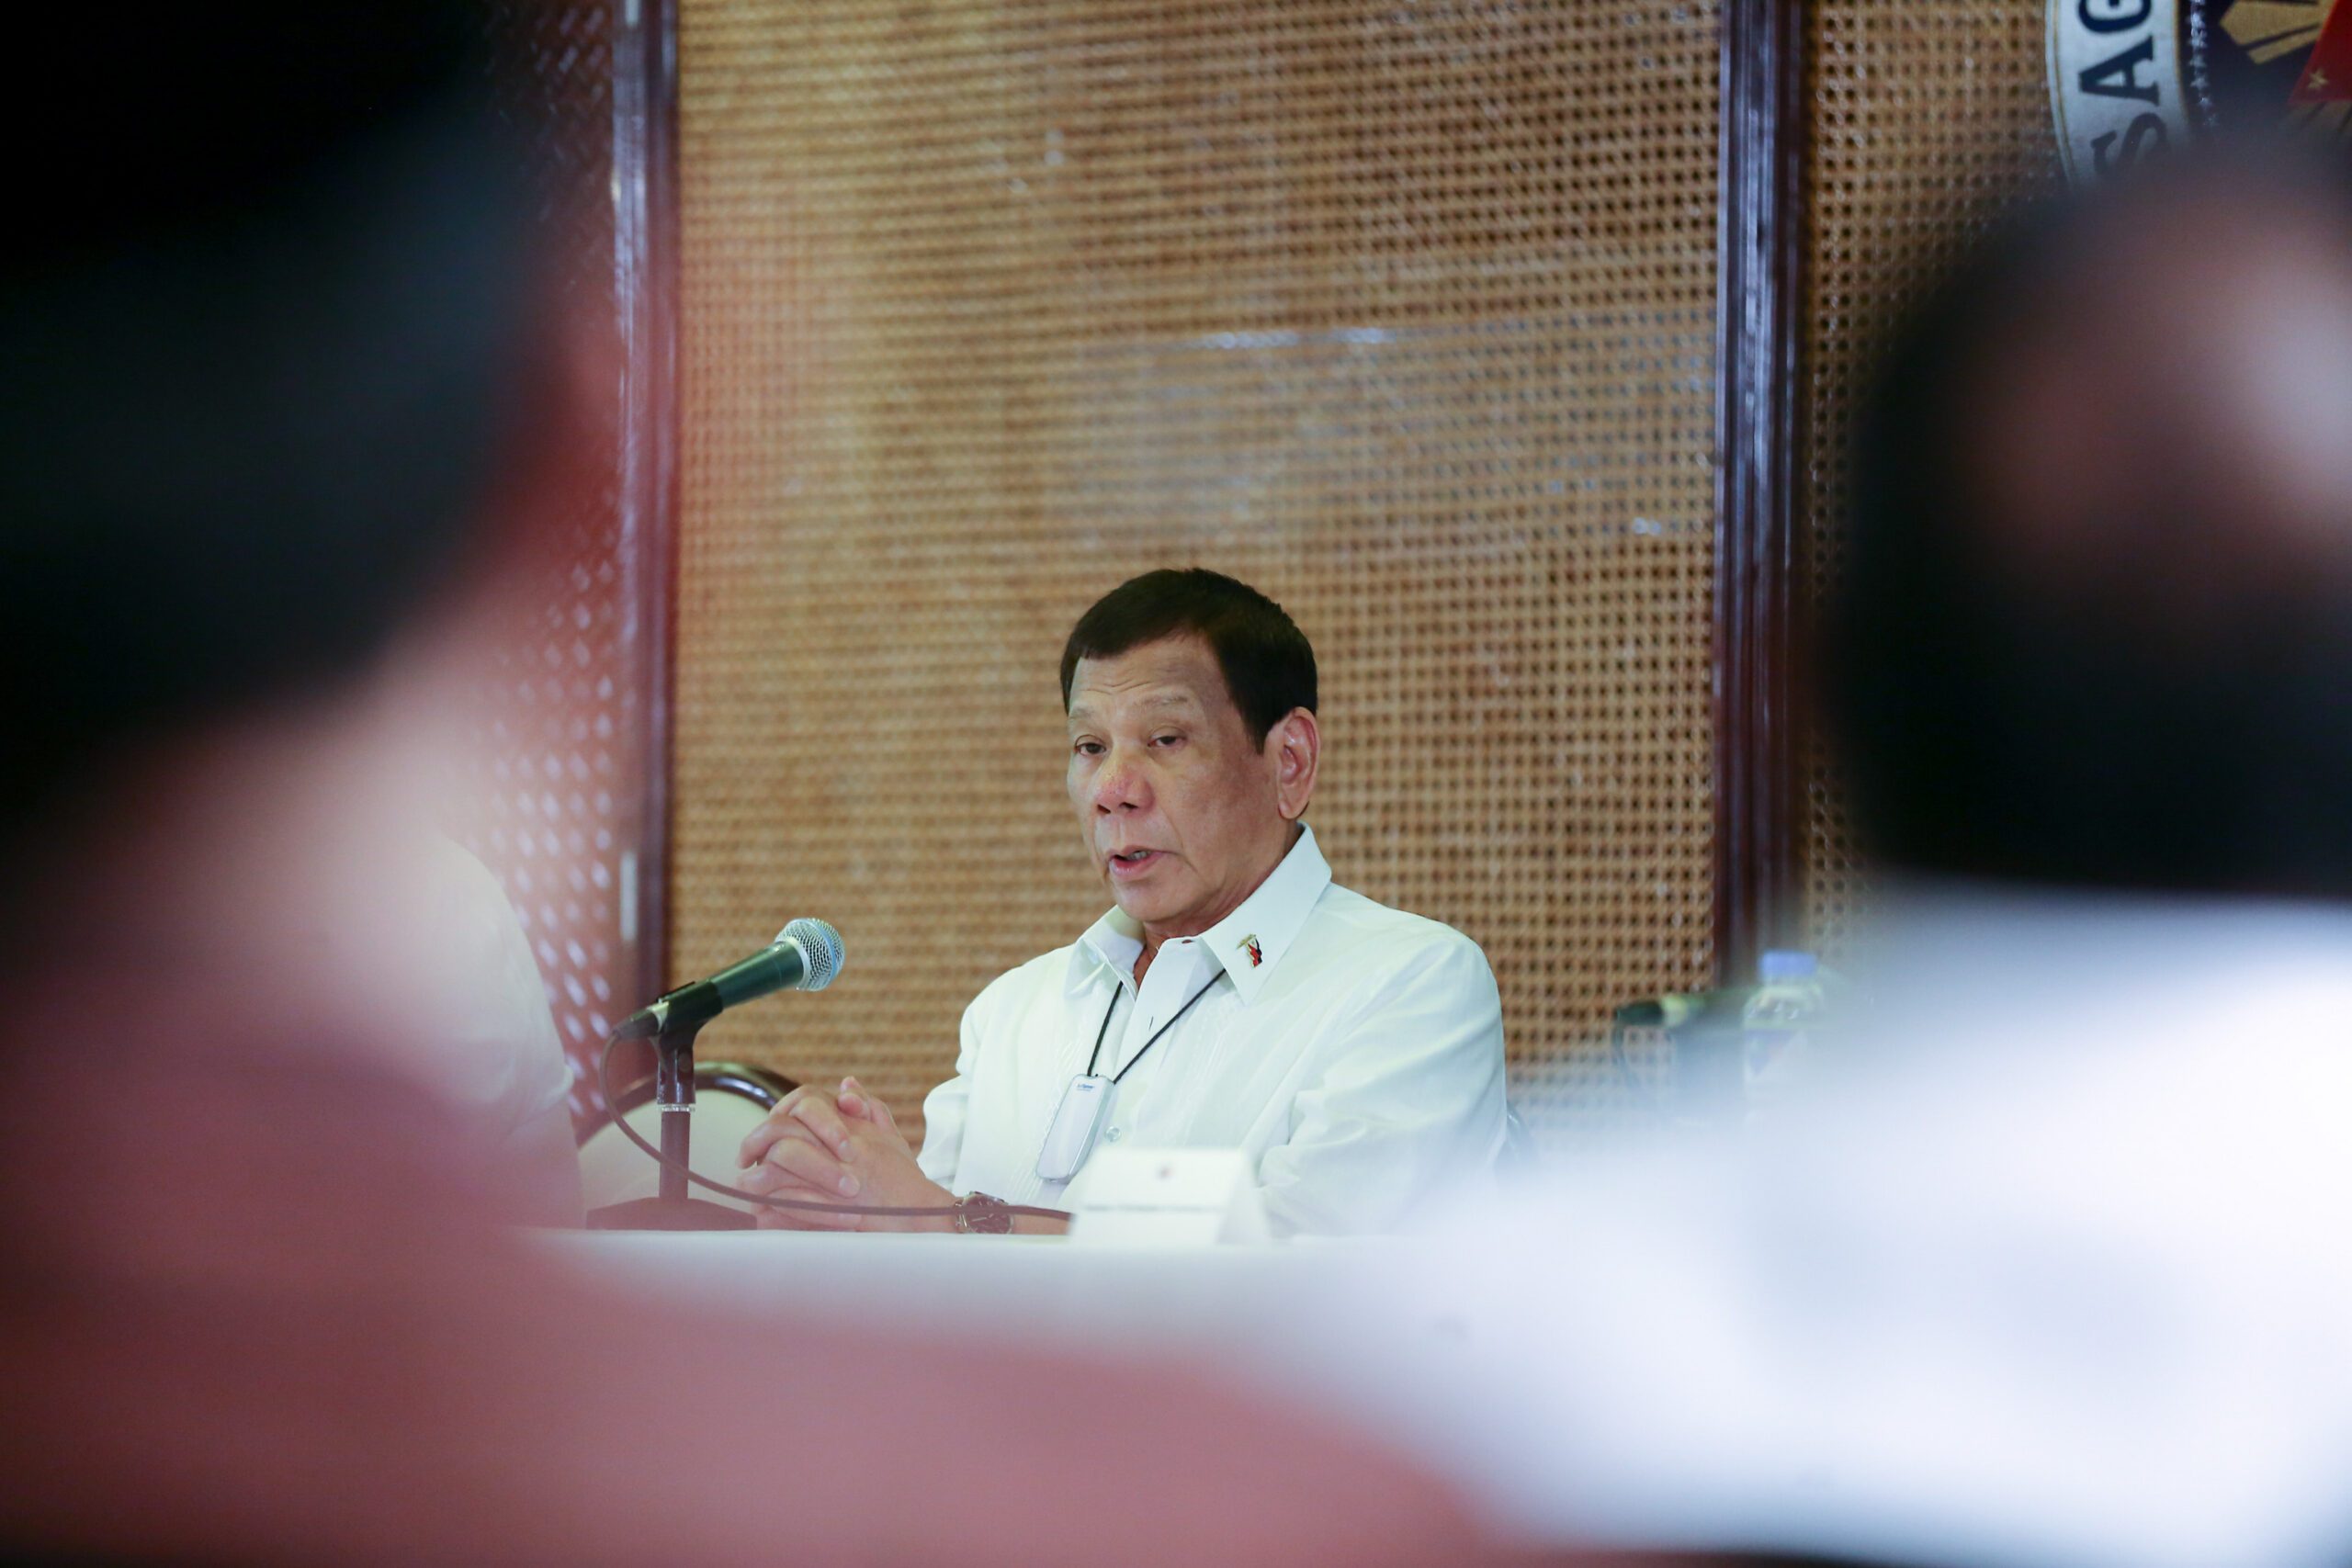 ‘No touch:’ PSG bans close contact with Duterte amid coronavirus outbreak